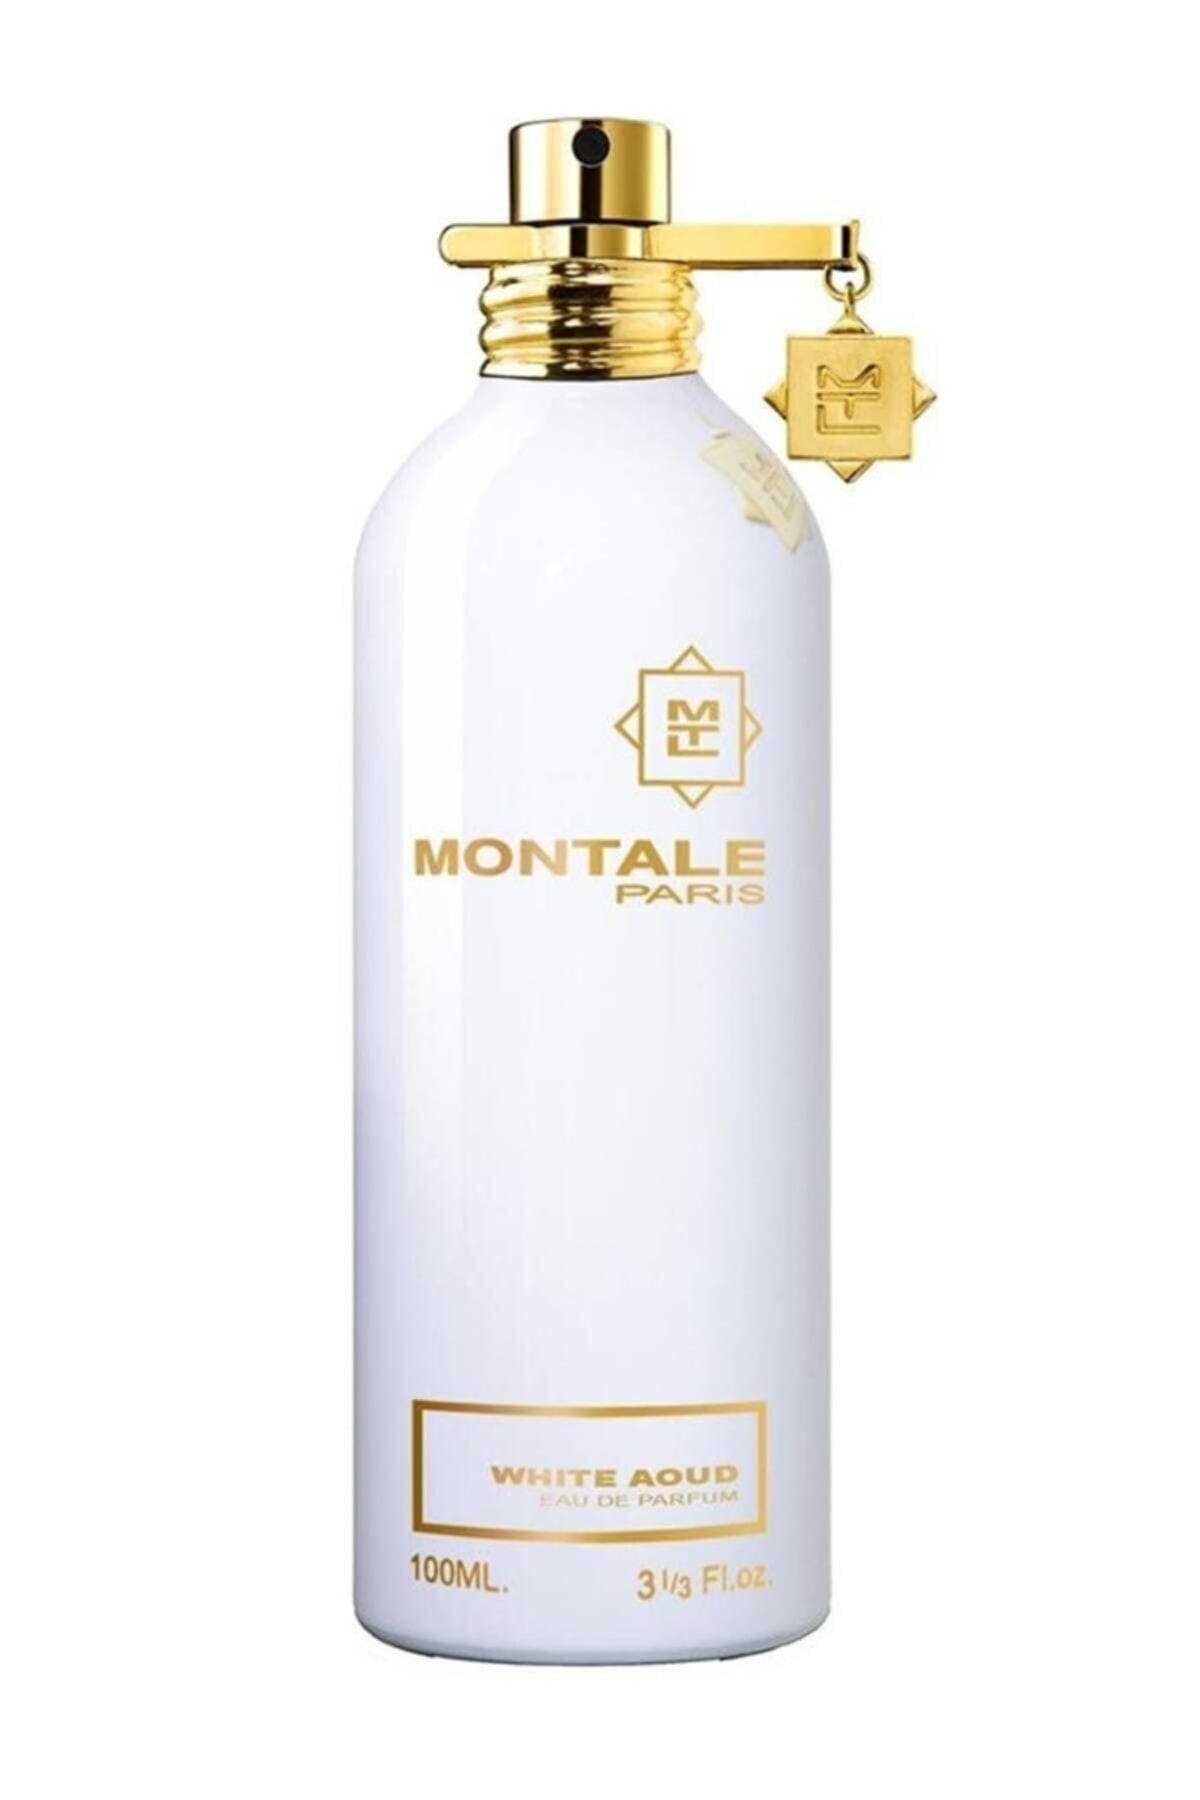 Montale white. Montale White Aoud. Парфюмерная вода Mukhallat Montale 100ml. Montale Mukhallat штрих код. Montale Mukhallat парфюмерная вода 100 мл фото.